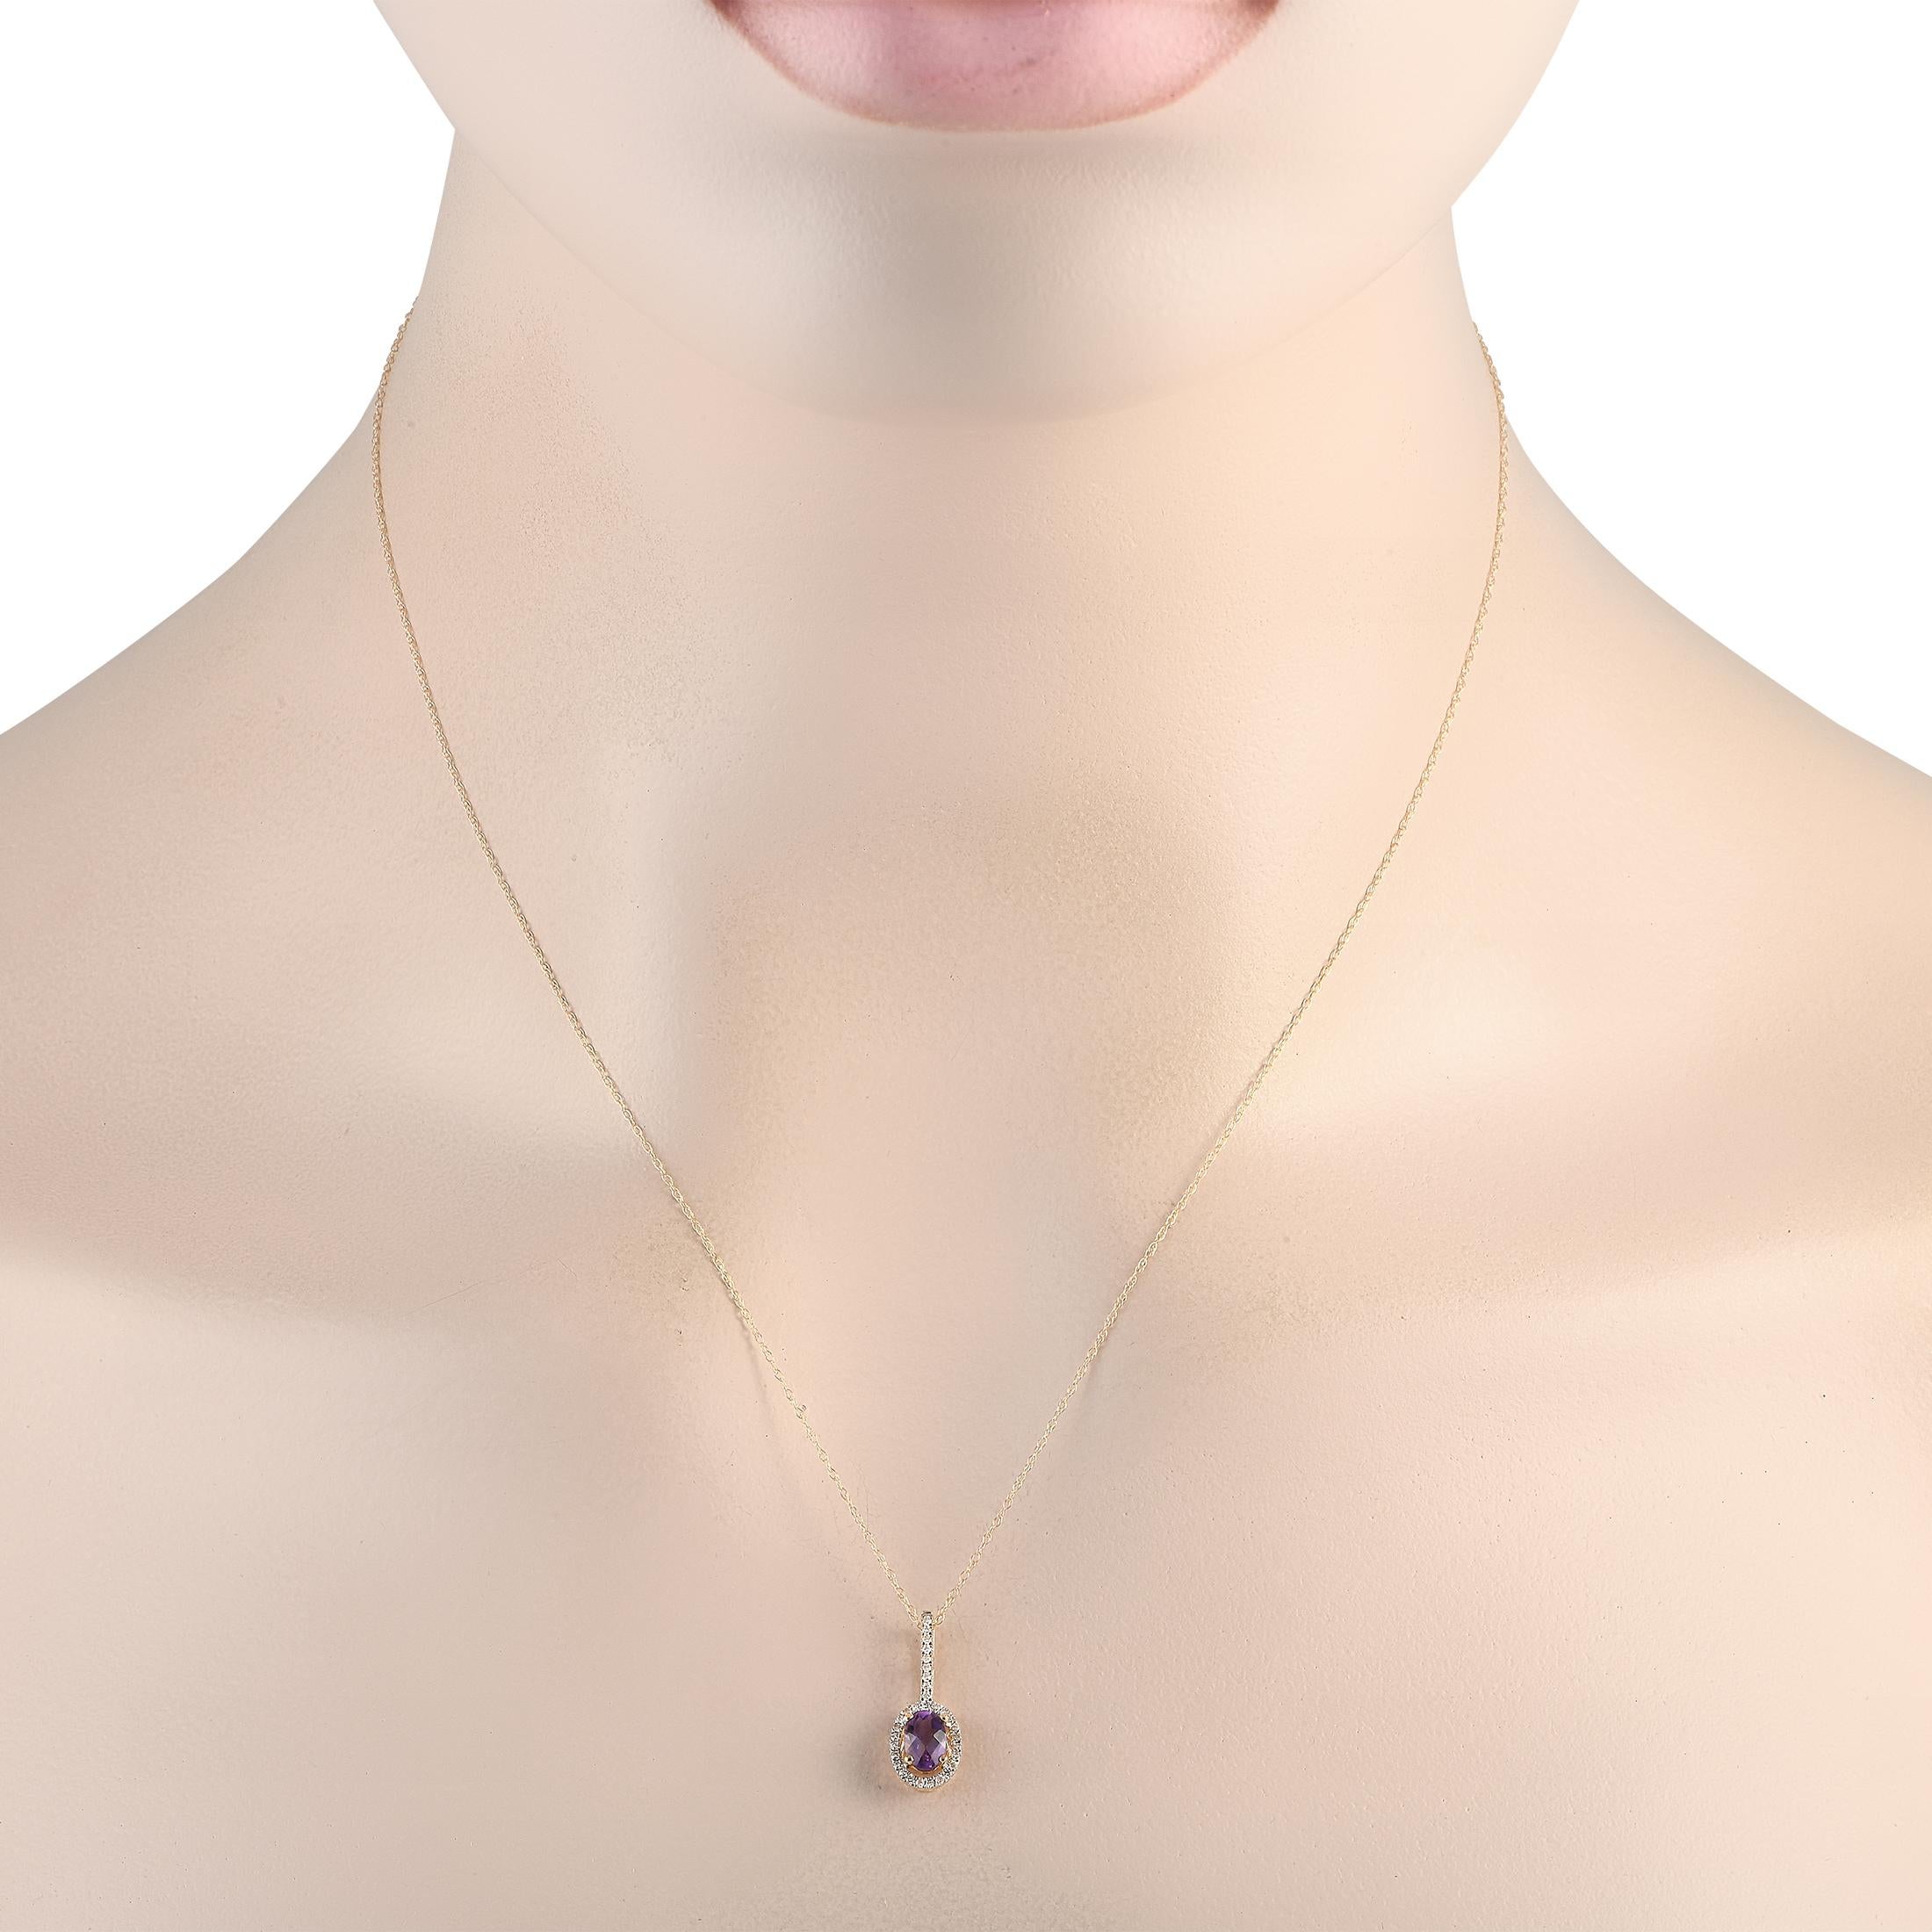 Designed with the February birthstone, this LB Exclusive necklace shimmers with sophistication. It is fully crafted in 14K yellow gold, with a double cable chain necklace, a diamond-traced bail, and an amethyst pendant haloed by more diamonds. The